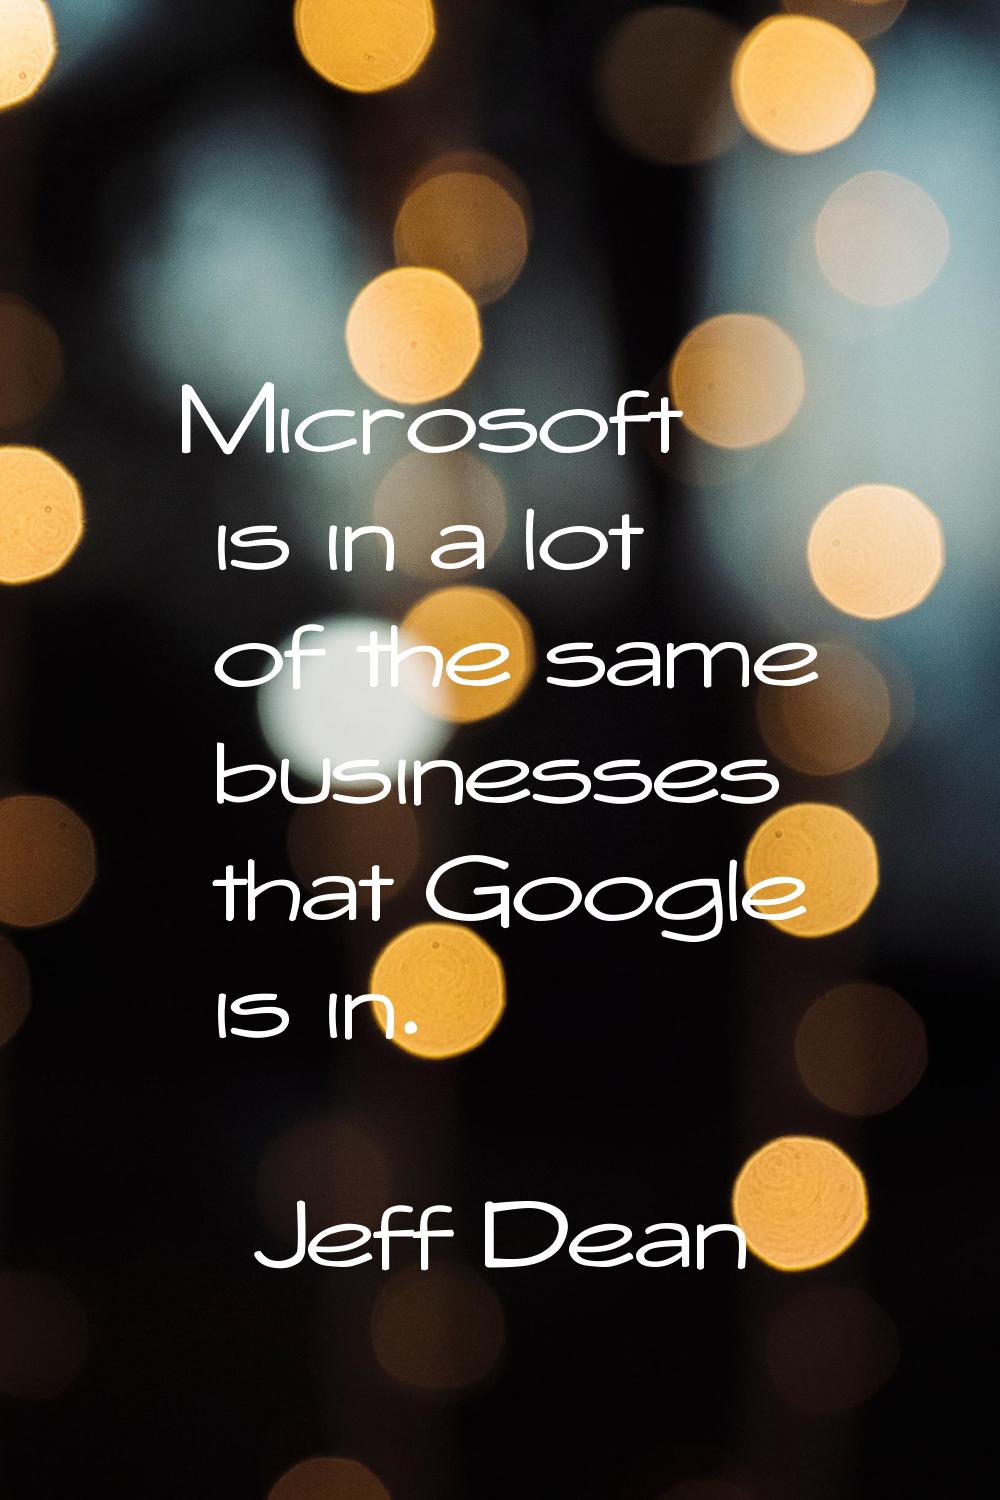 Microsoft is in a lot of the same businesses that Google is in.